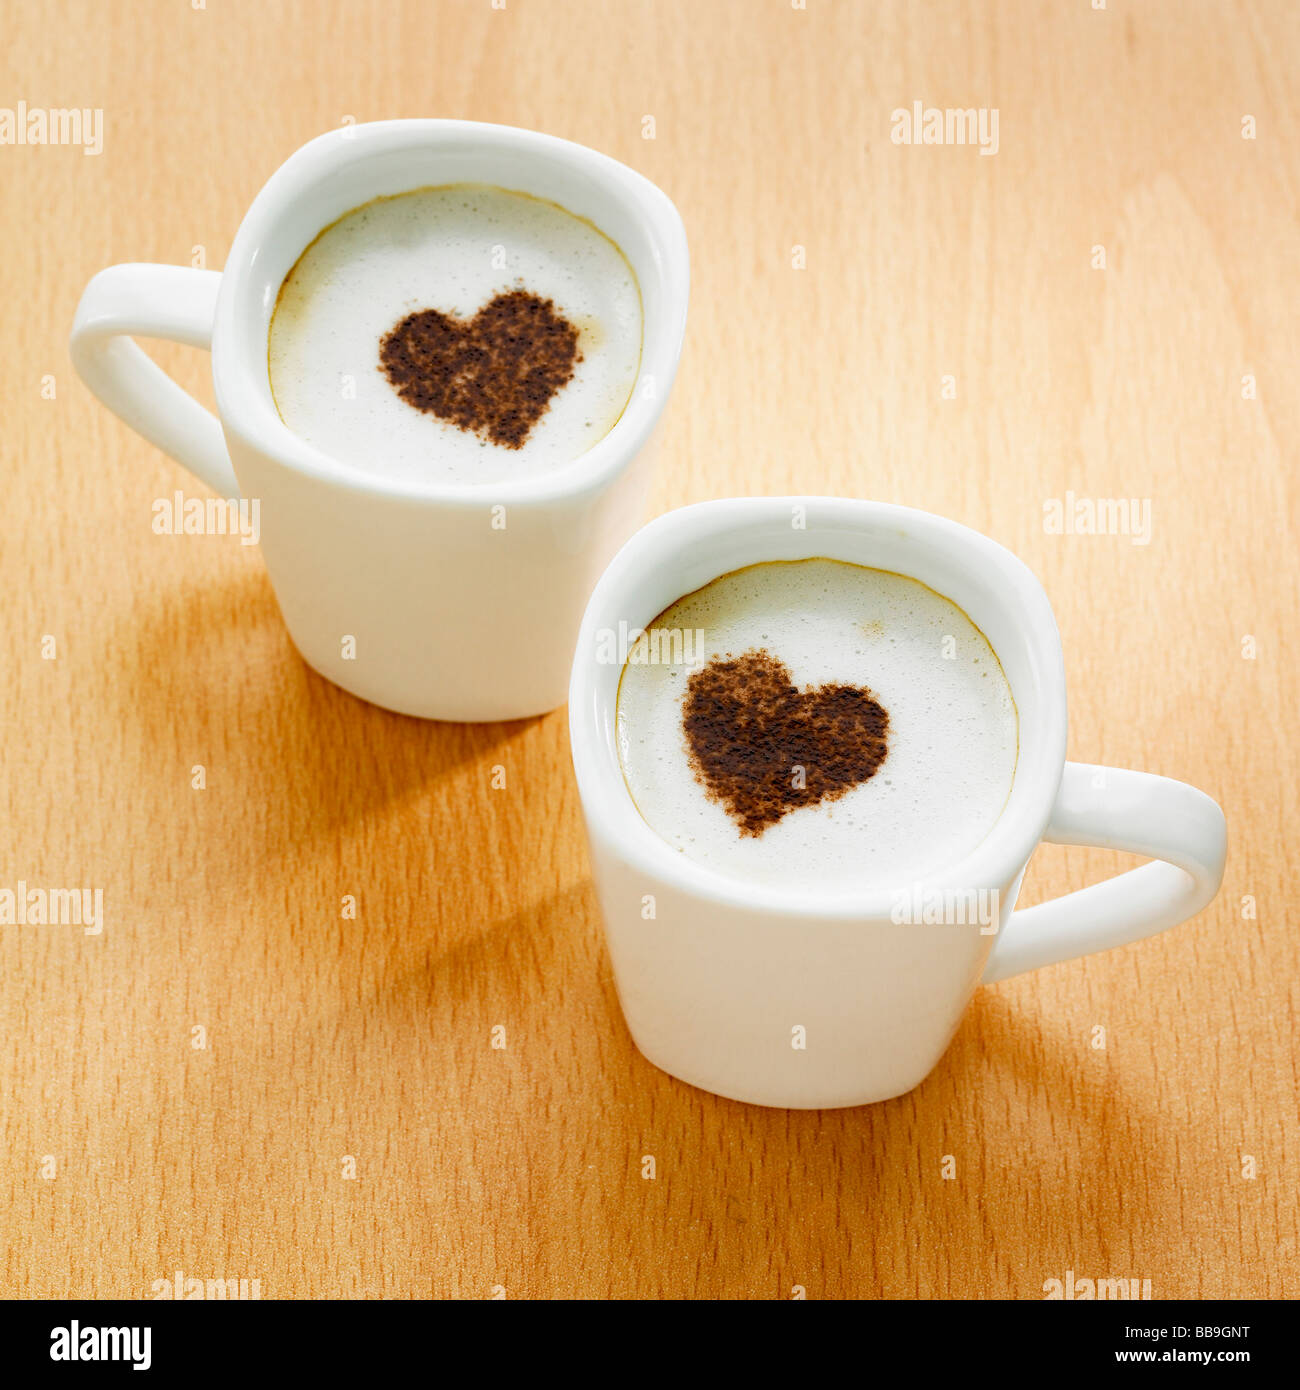 Two cups of coffee cappuccino style with heart shapes on the tops ...